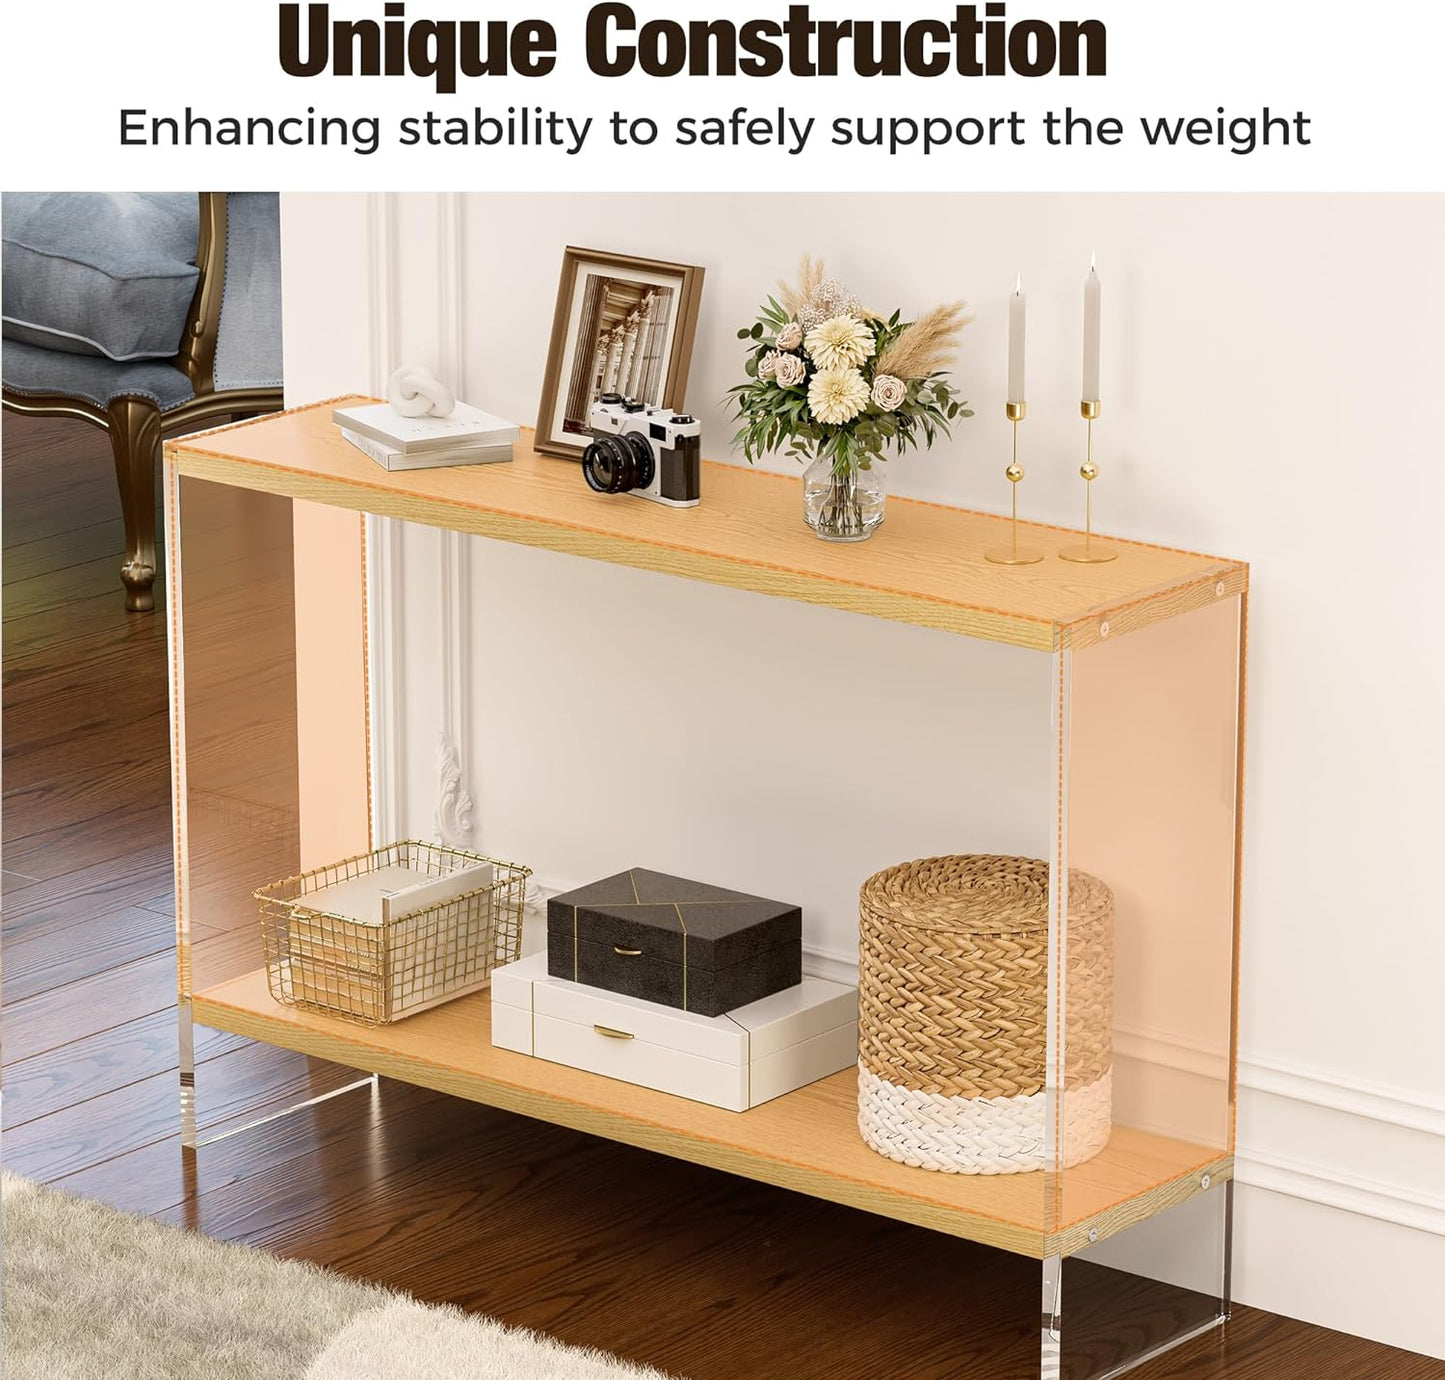 WAHFAY Acrylic Console Table, 47.5" Modern Entryway Table with Storage Shelf, Clear Acrylic Doorway Desk, 2-Tier Coffee Table for Living Room, Bedroom, Hallway and Dining Room, Natural Oak